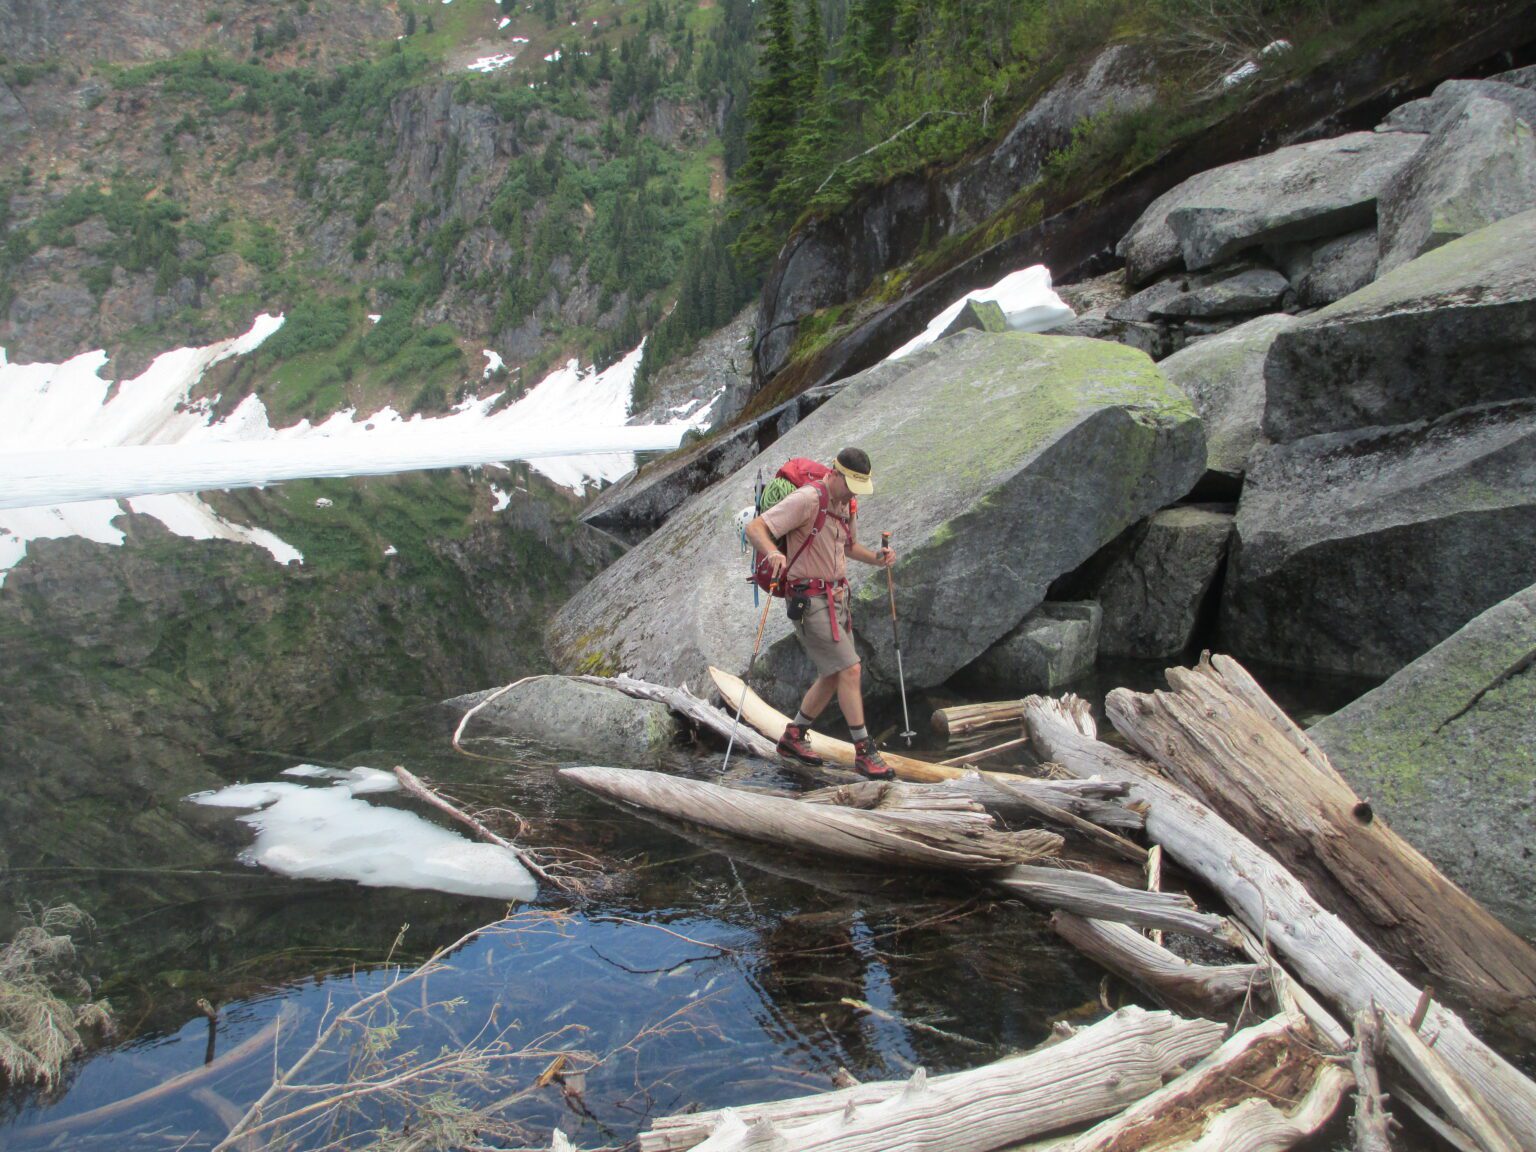 Backpacker Dave Zulinke crosses a log jam at Thornton Lake. Backcountry adventurers are increasingly adding the threat of human violence into calculations about outdoor activities. Crime in wilderness and backcountry areas is rare